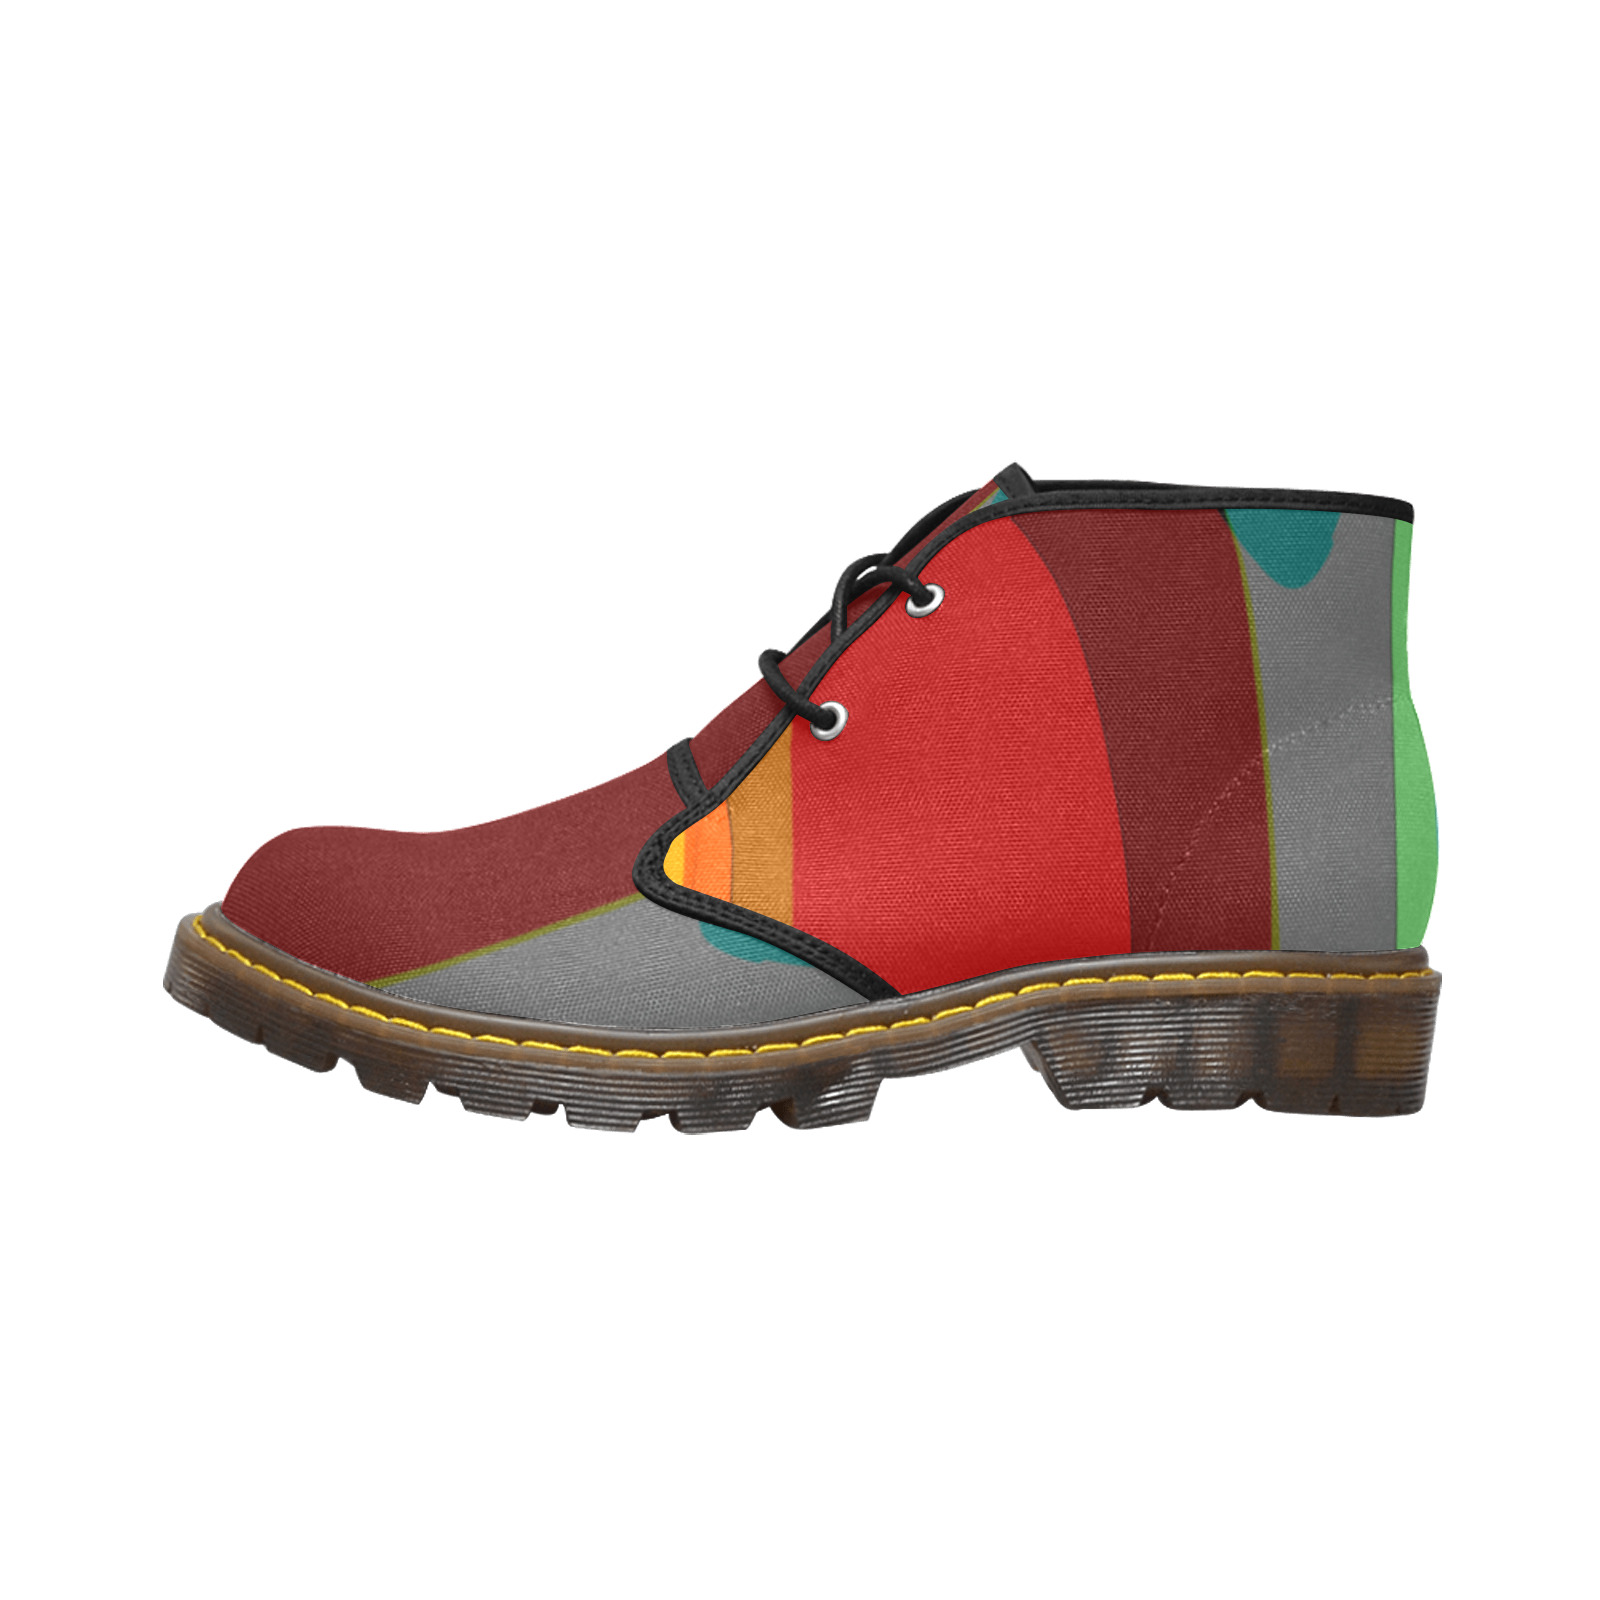 Colorful Abstract 118 Men's Canvas Chukka Boots (Model 2402-1)